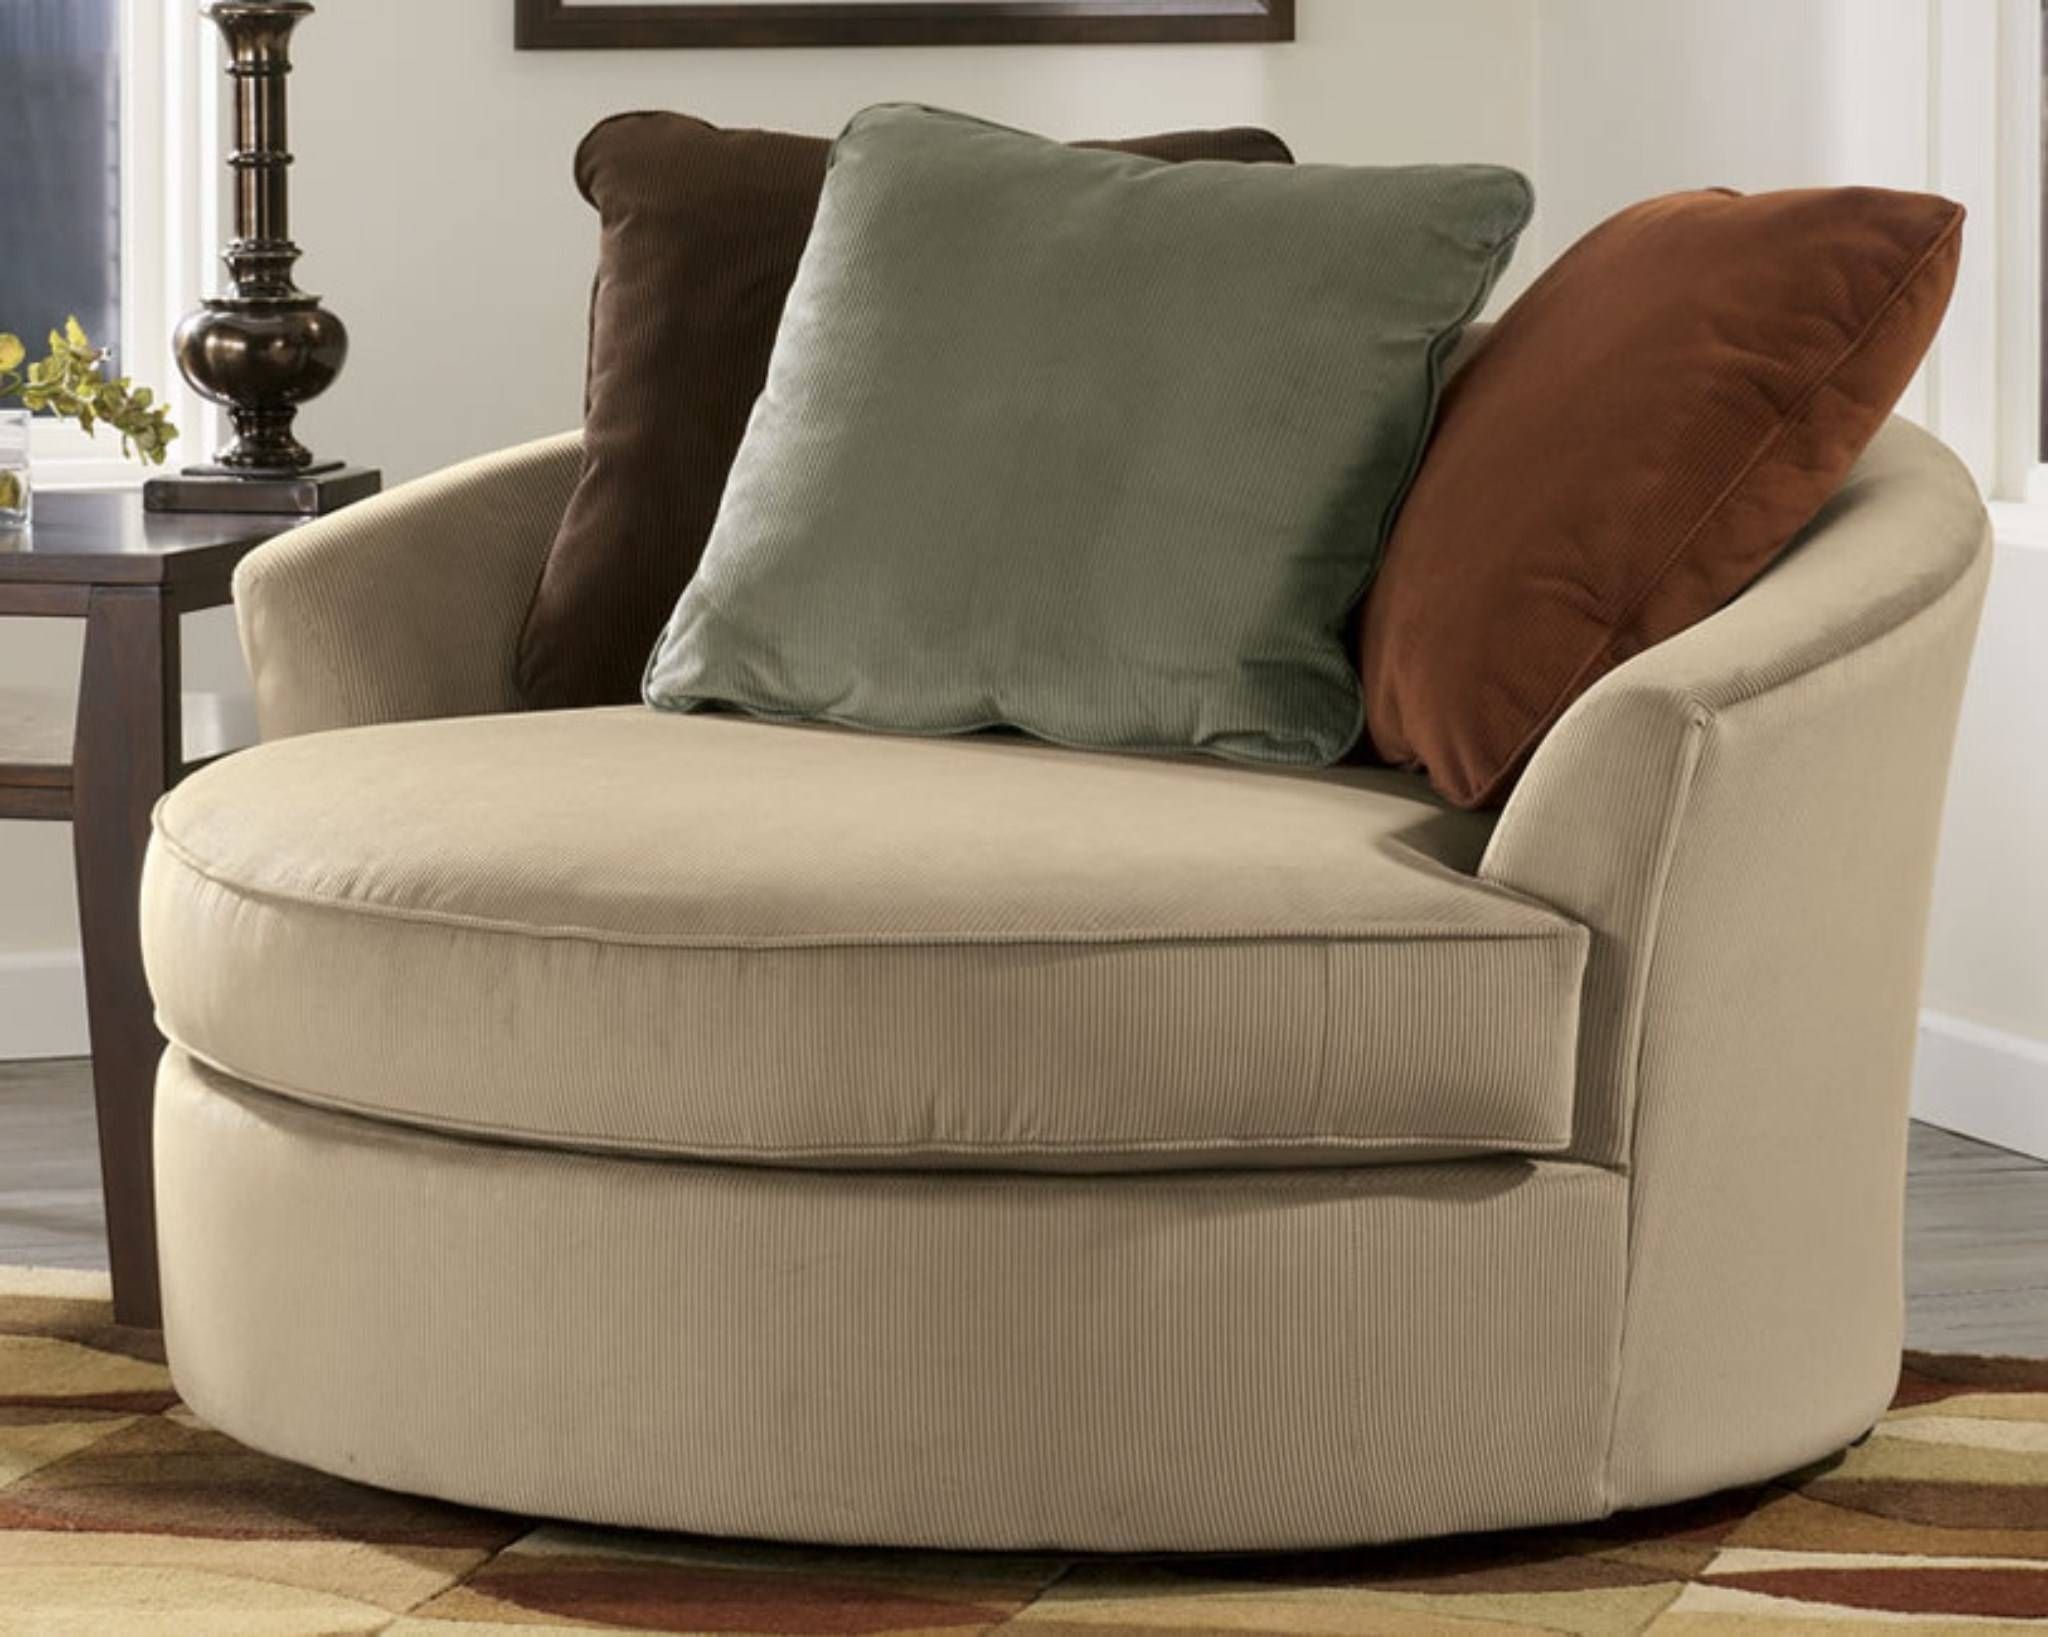 Oversized Sofa Chair | Tehranmix Decoration With Regard To Oversized Sofa Chairs (Photo 1 of 15)